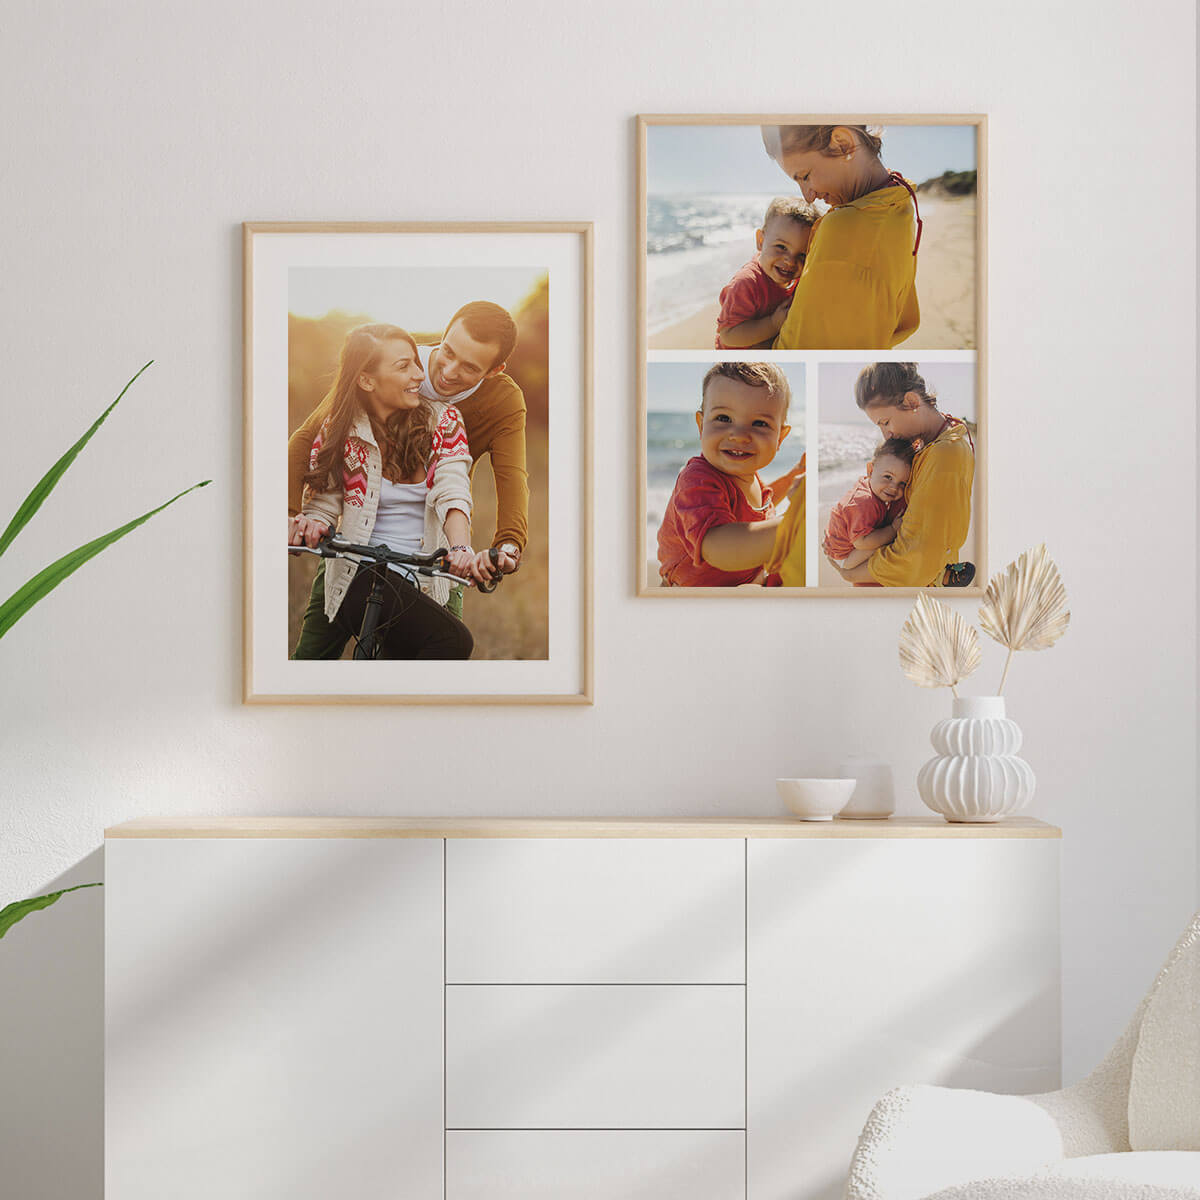 Personalized Photo Posters